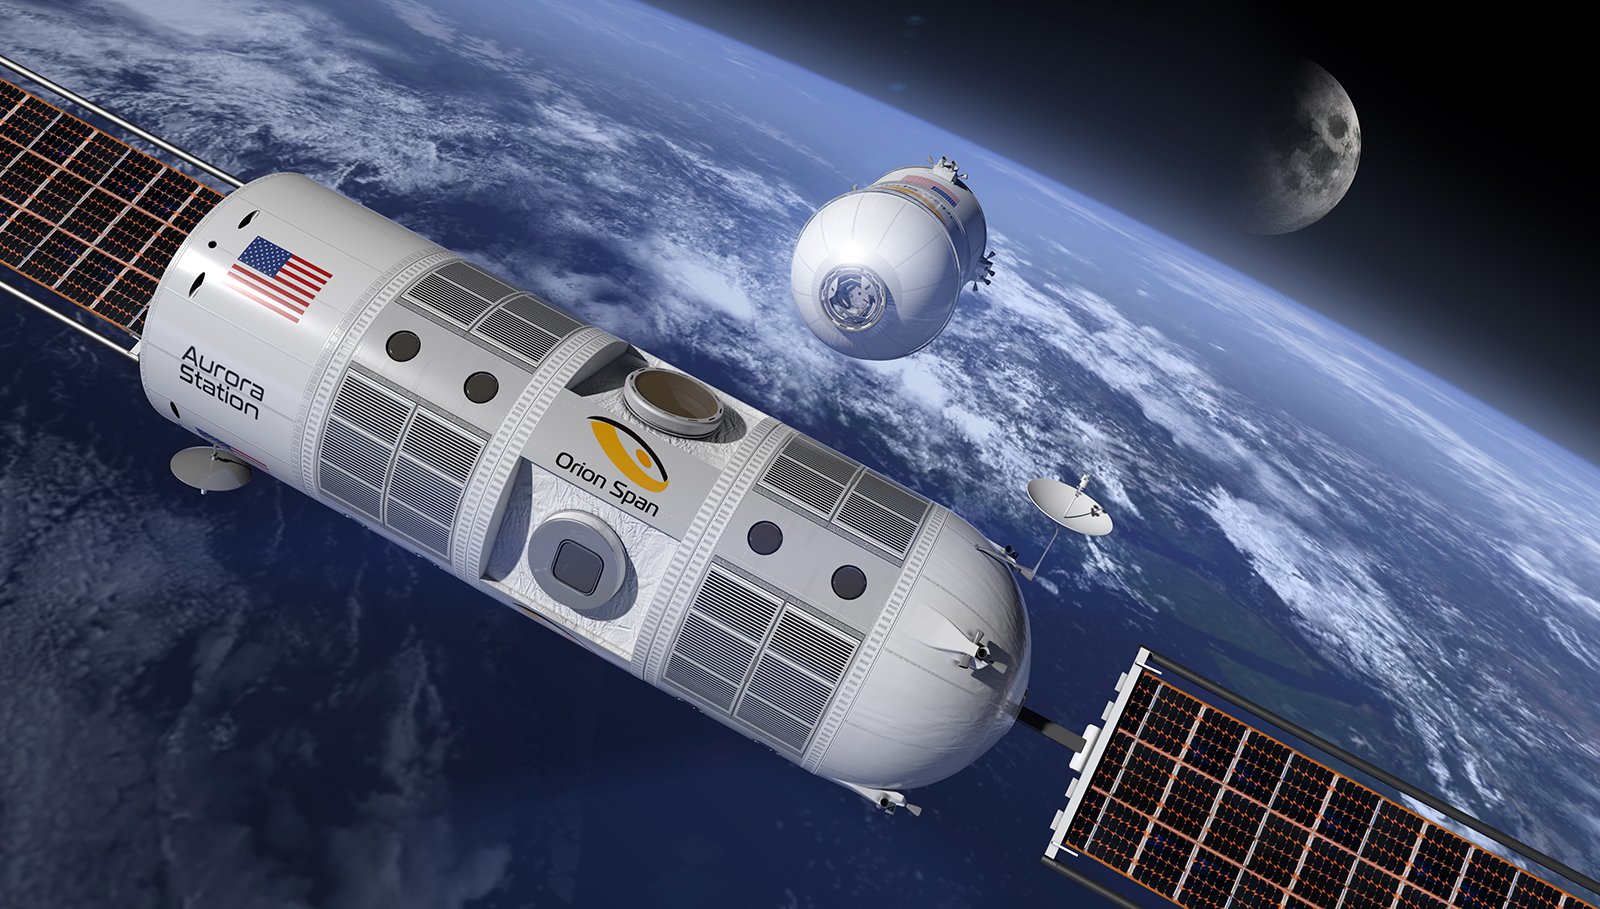 The World’s First Space Hotel Is Coming Soon